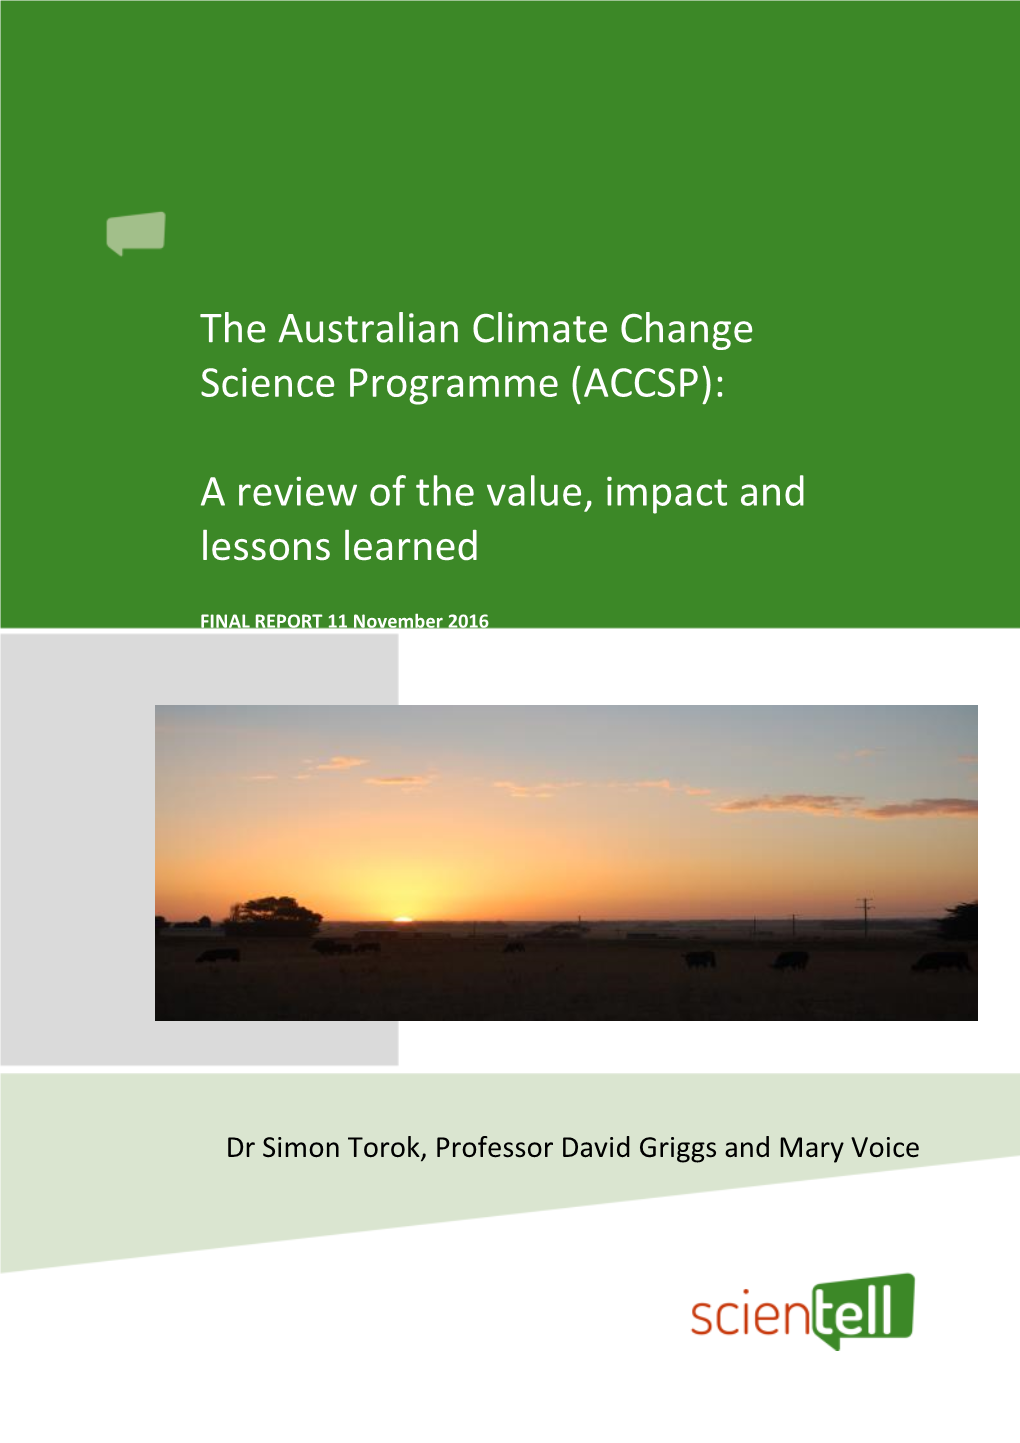 The Australian Climate Change Science Programme (ACCSP): A